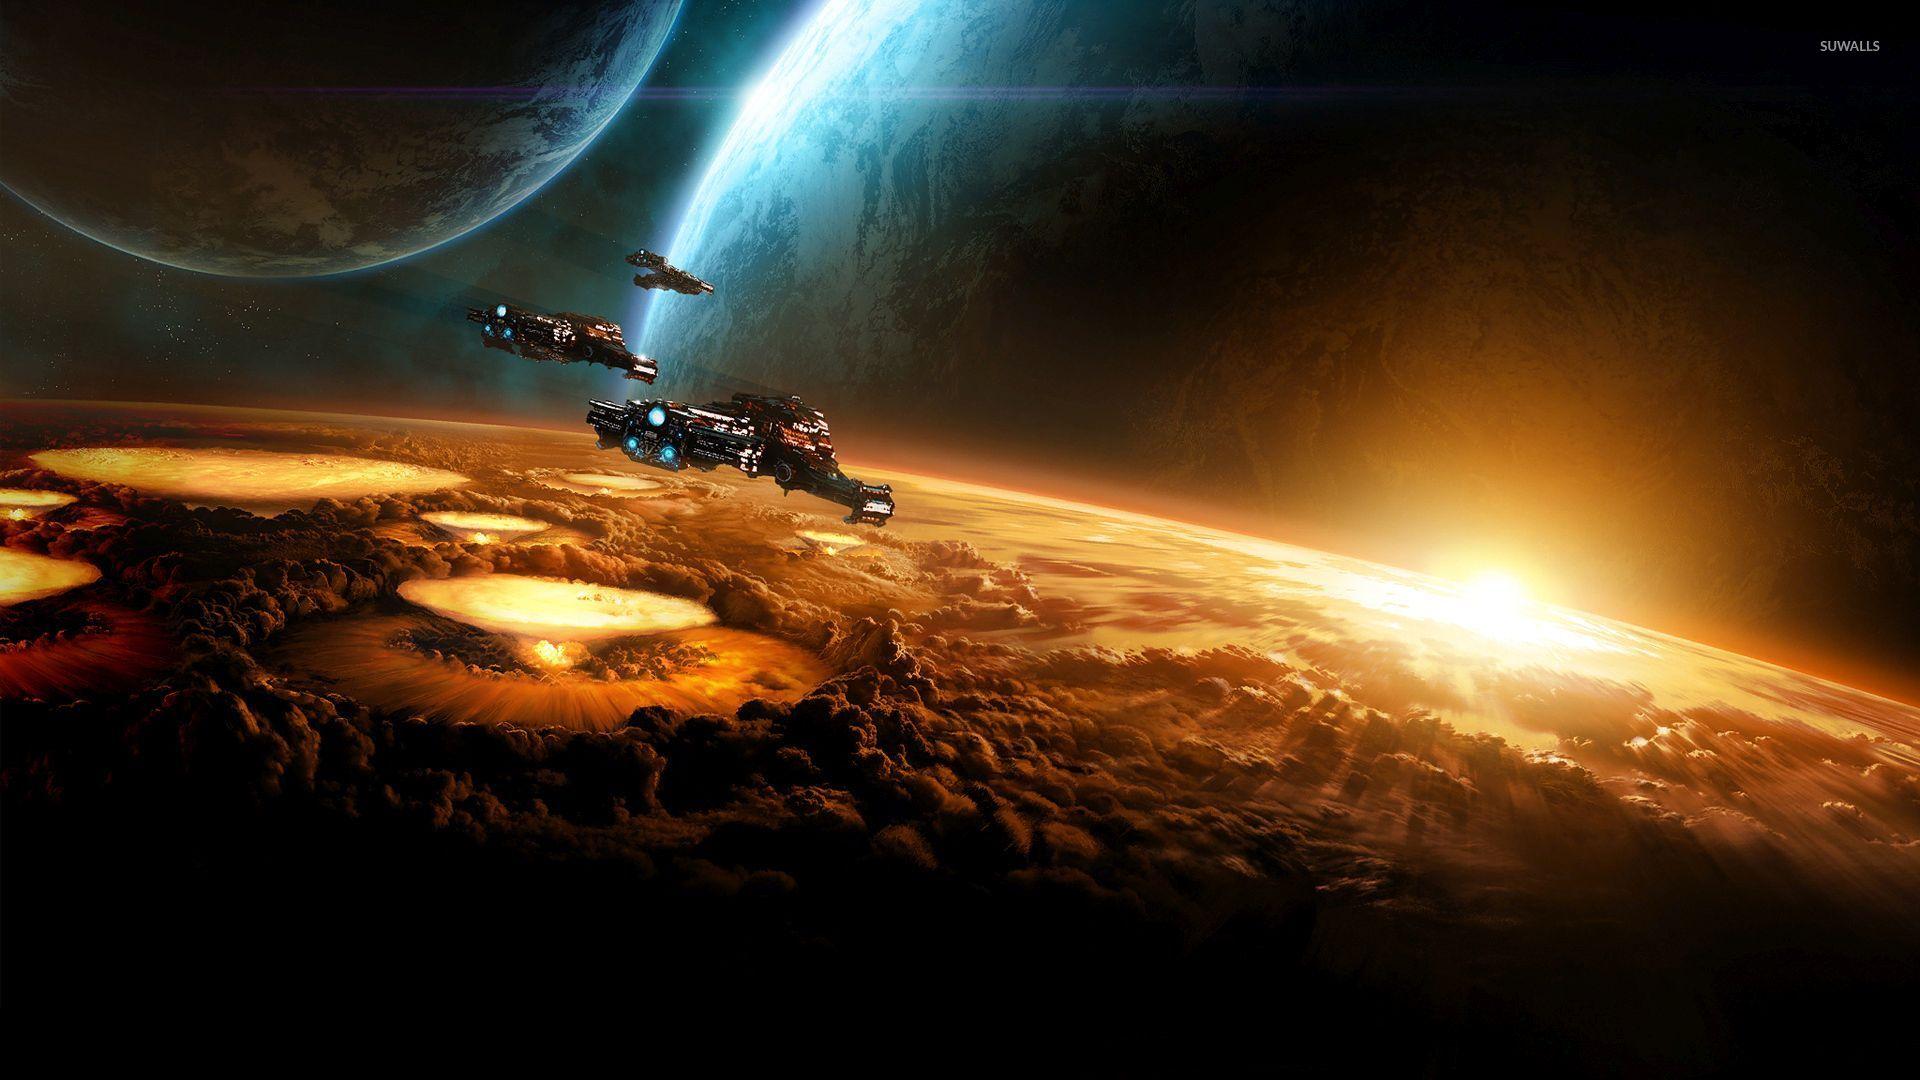 Spaceships heading to the light wallpaper